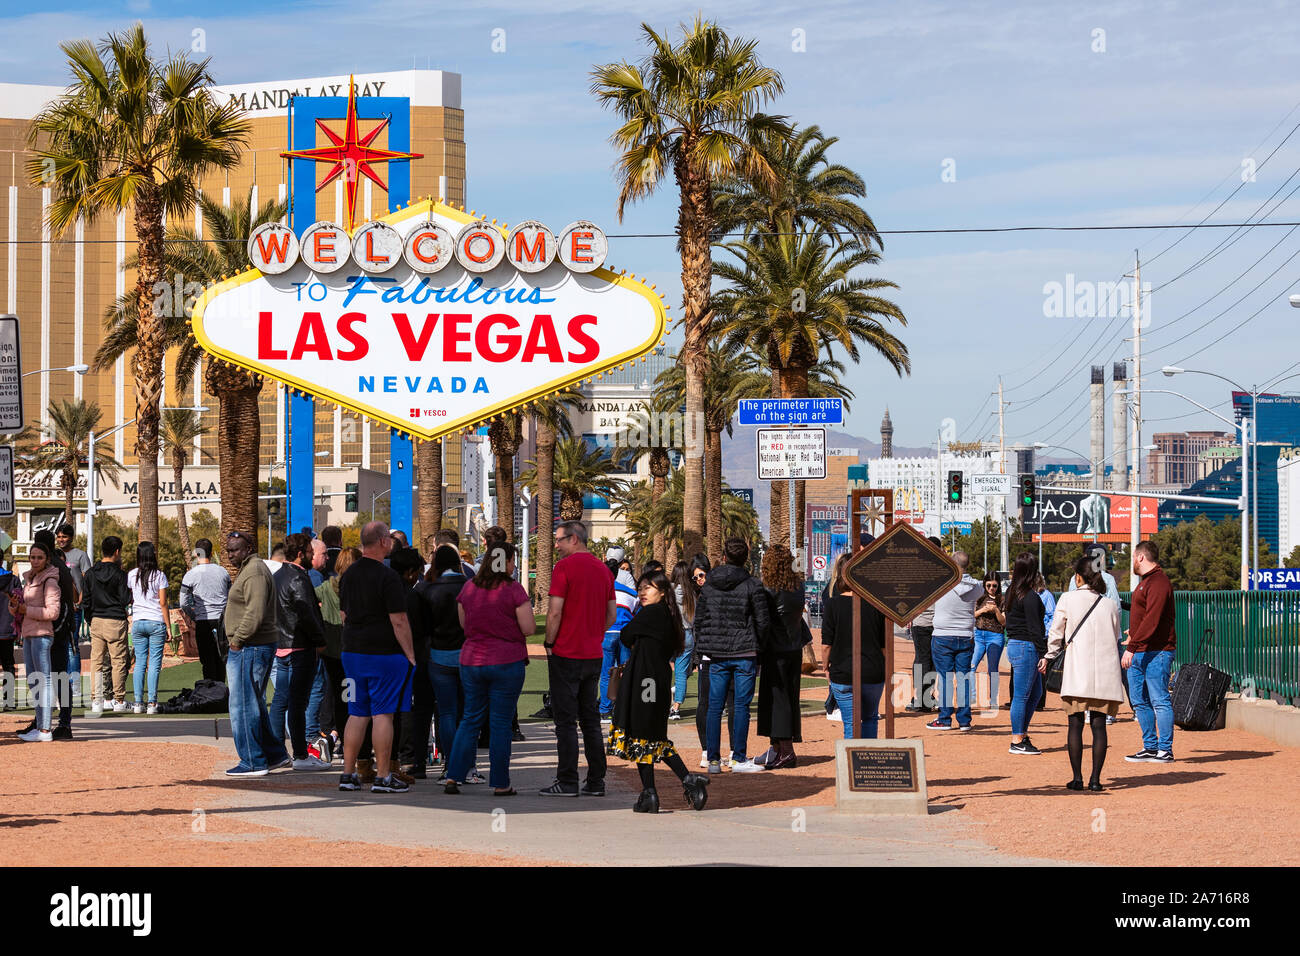 A crowd of tourists stand in line for photos at the Welcome to Fabulous Las Vegas sign in Las Vegas, Nevada, USA Stock Photo